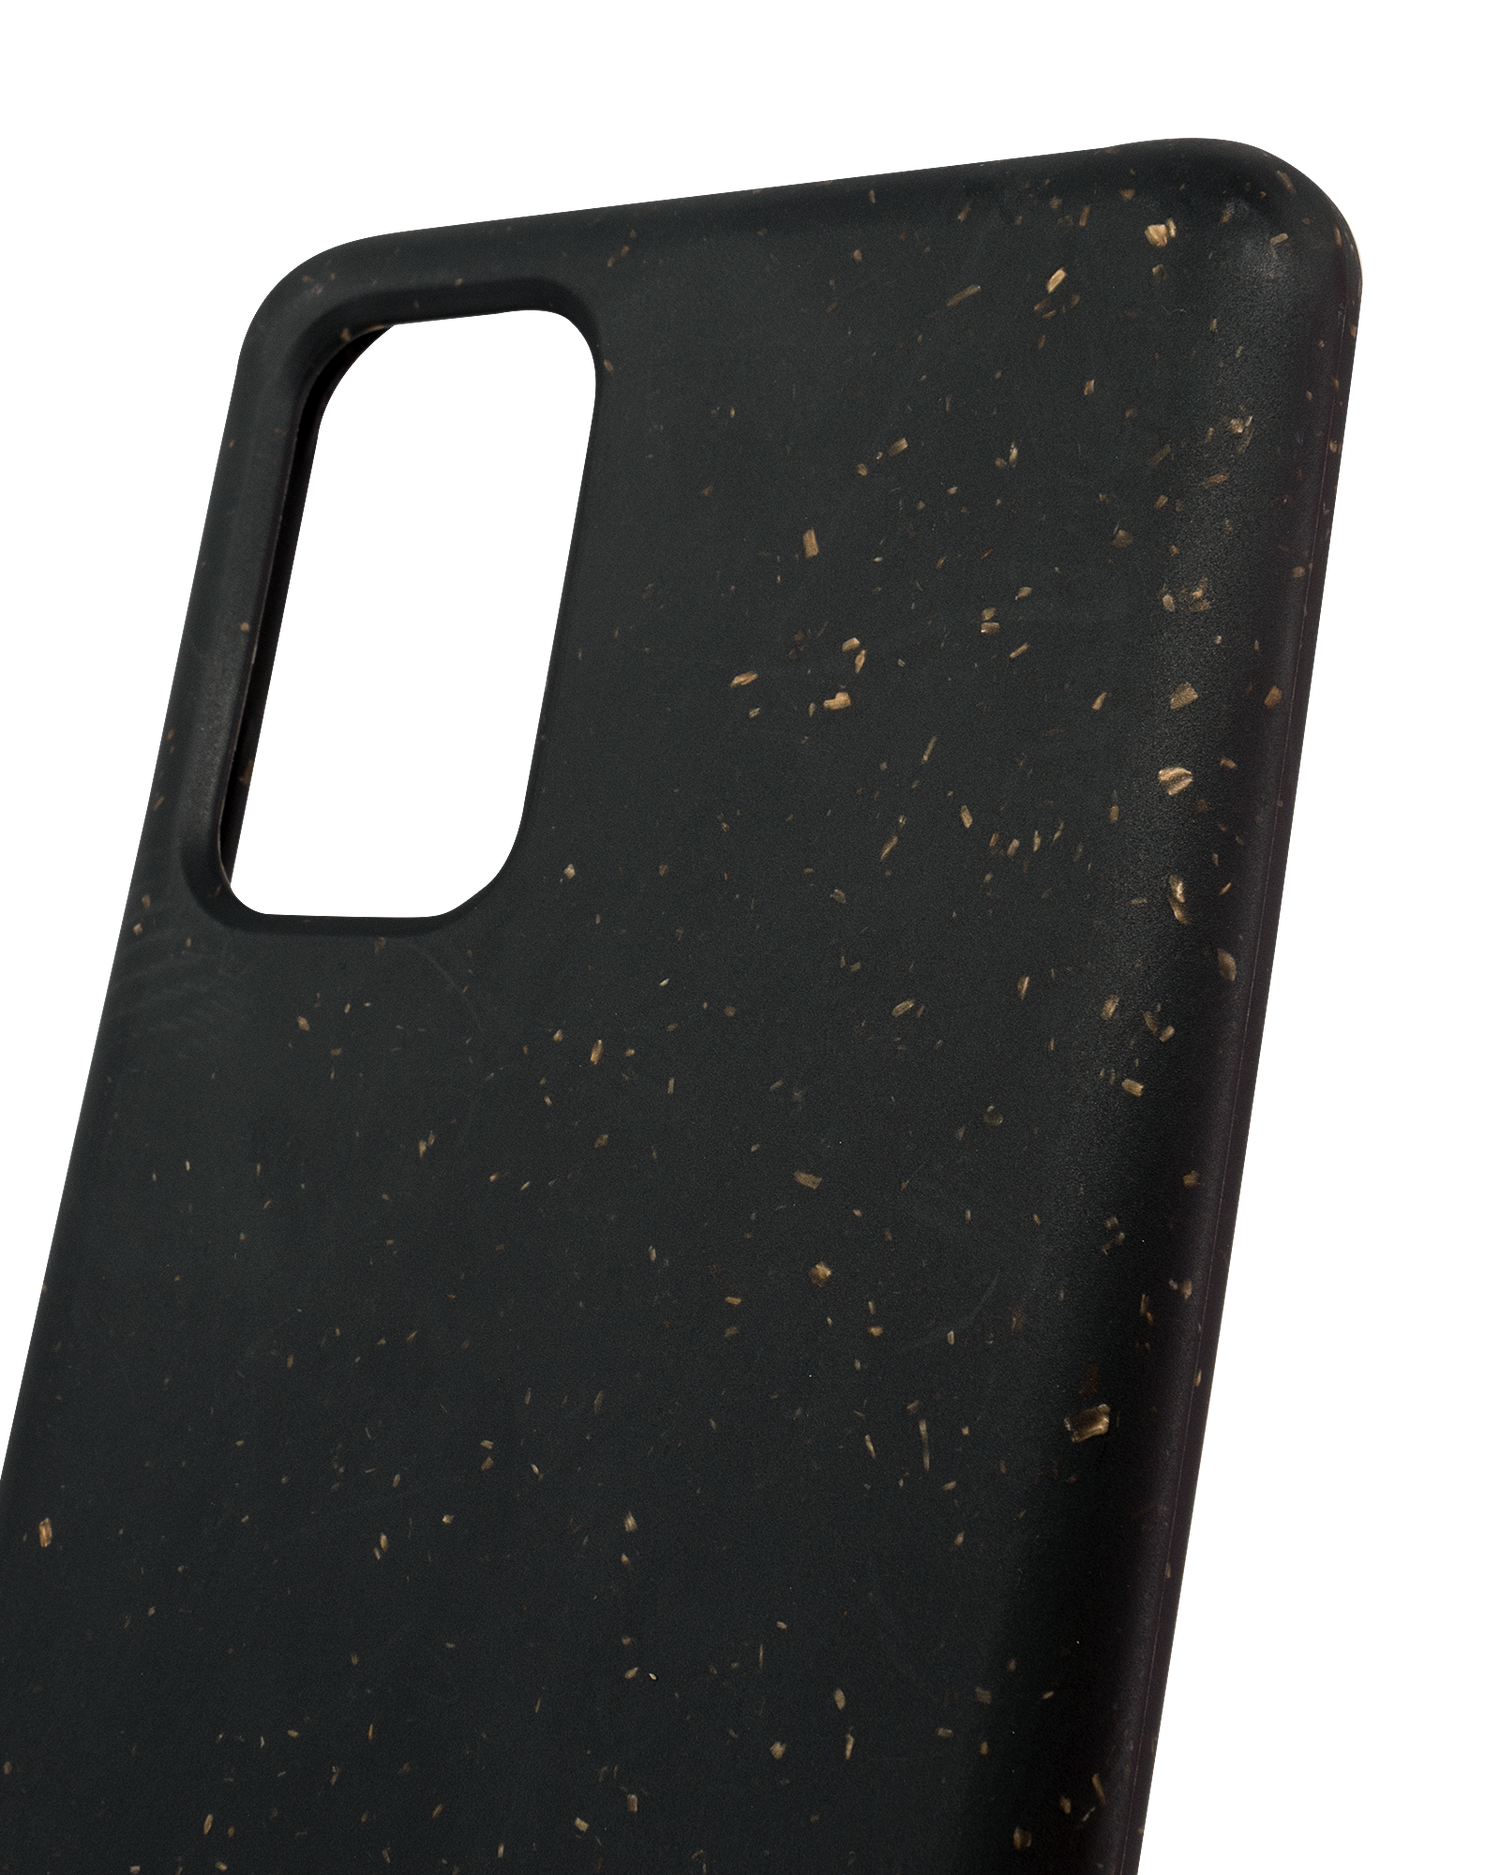 Black Eco-Friendly Phone Case for Samsung Galaxy S20 Plus: Details outside